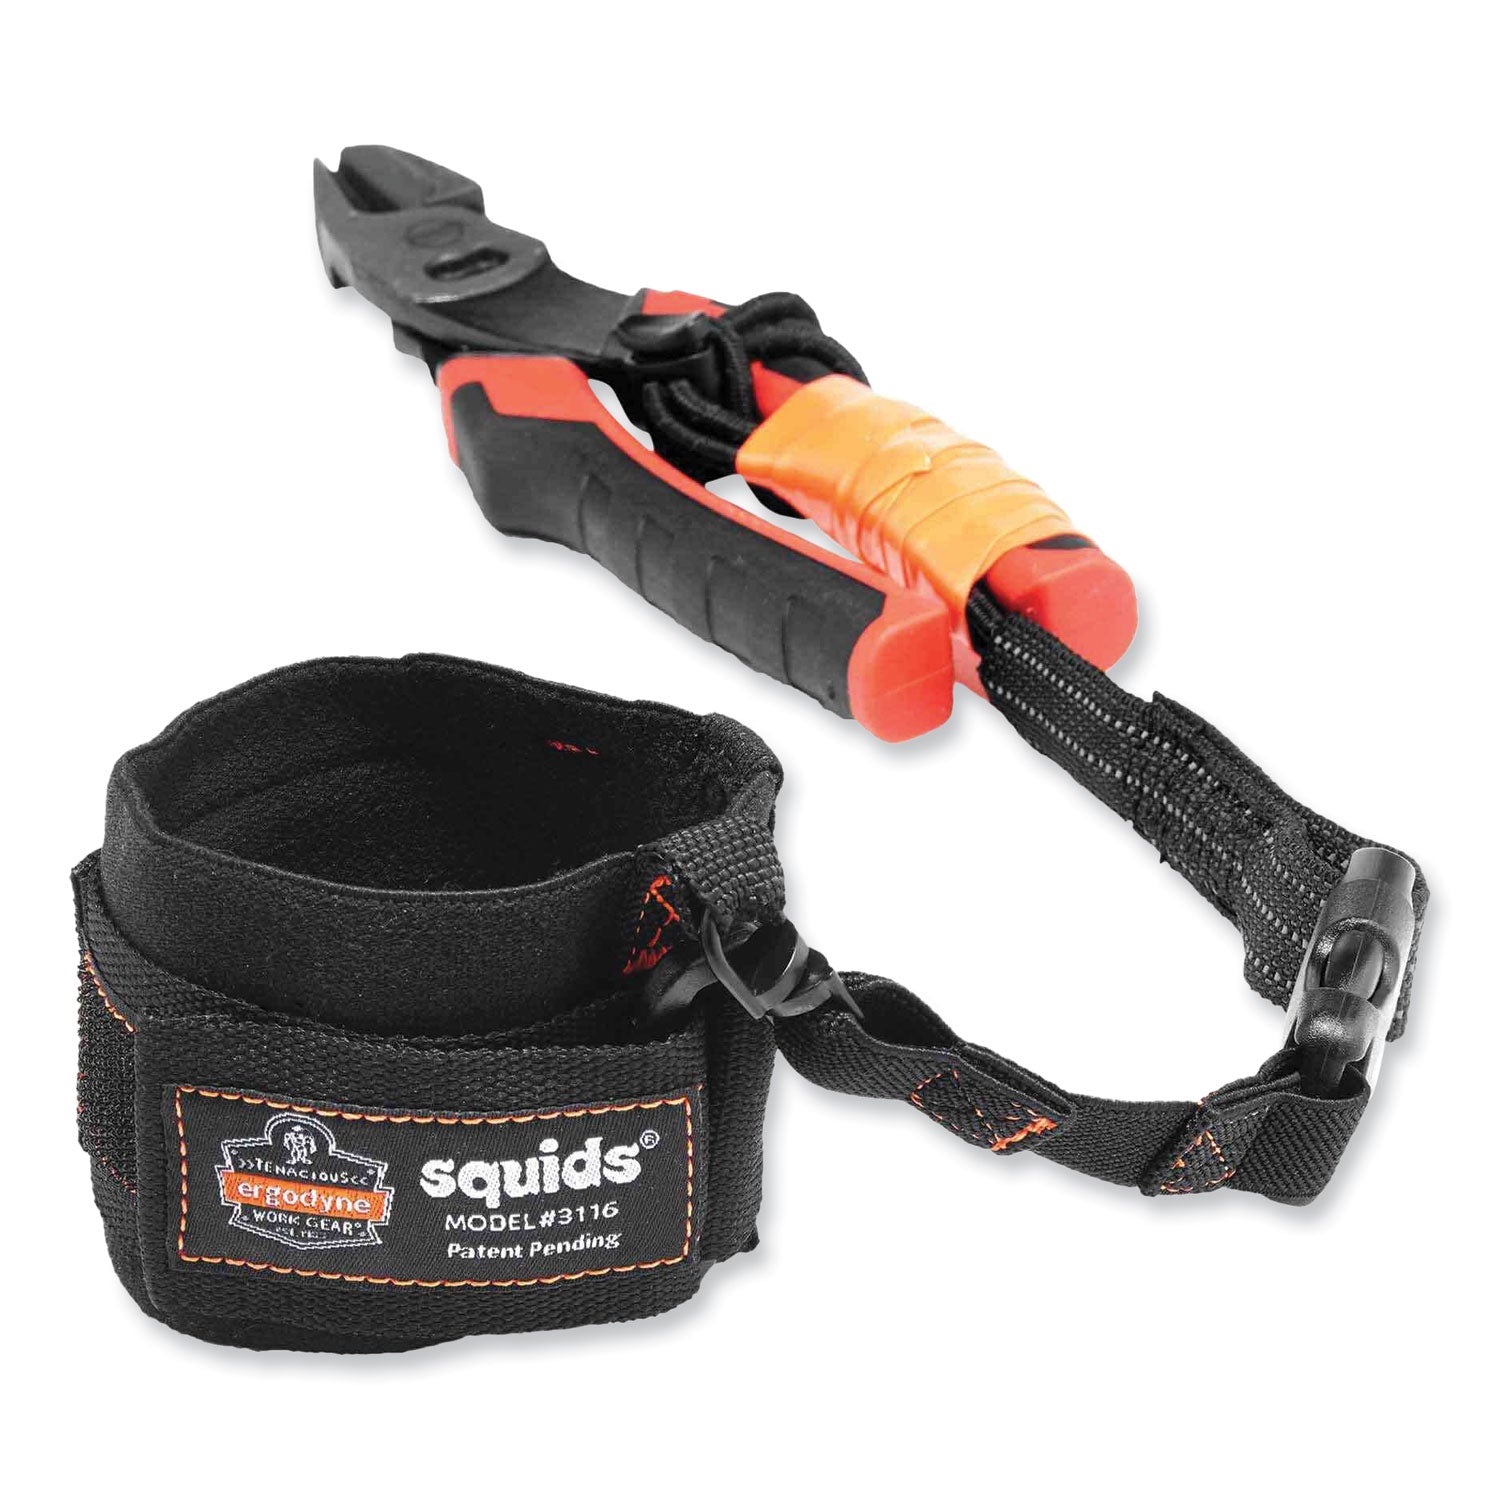 squids-3116-pull-on-wrist-lanyard-with-buckle-3-lb-max-working-capacity-75-long-black-ships-in-1-3-business-days_ego19057 - 4